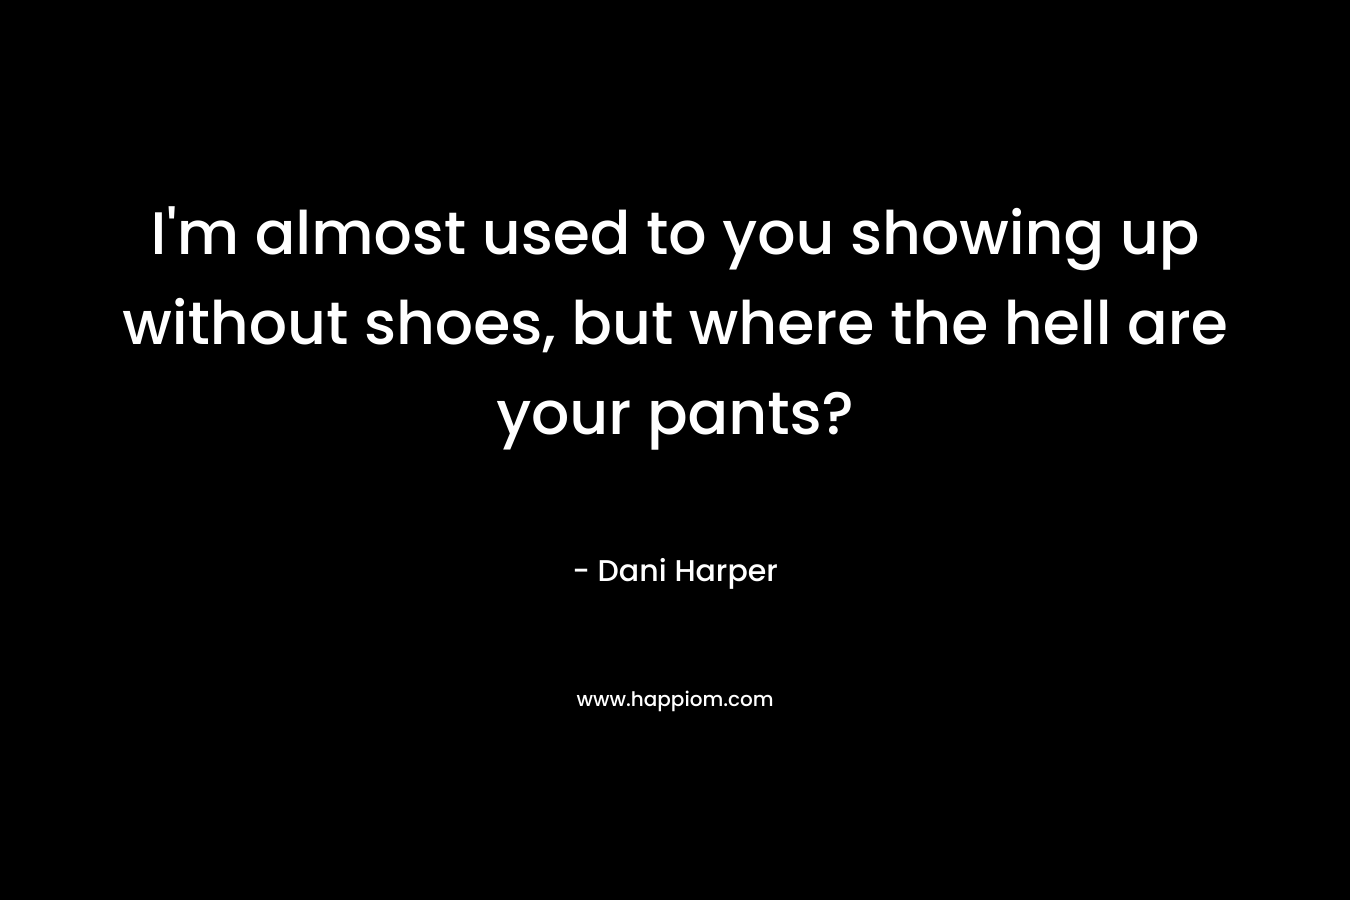 I’m almost used to you showing up without shoes, but where the hell are your pants? – Dani Harper